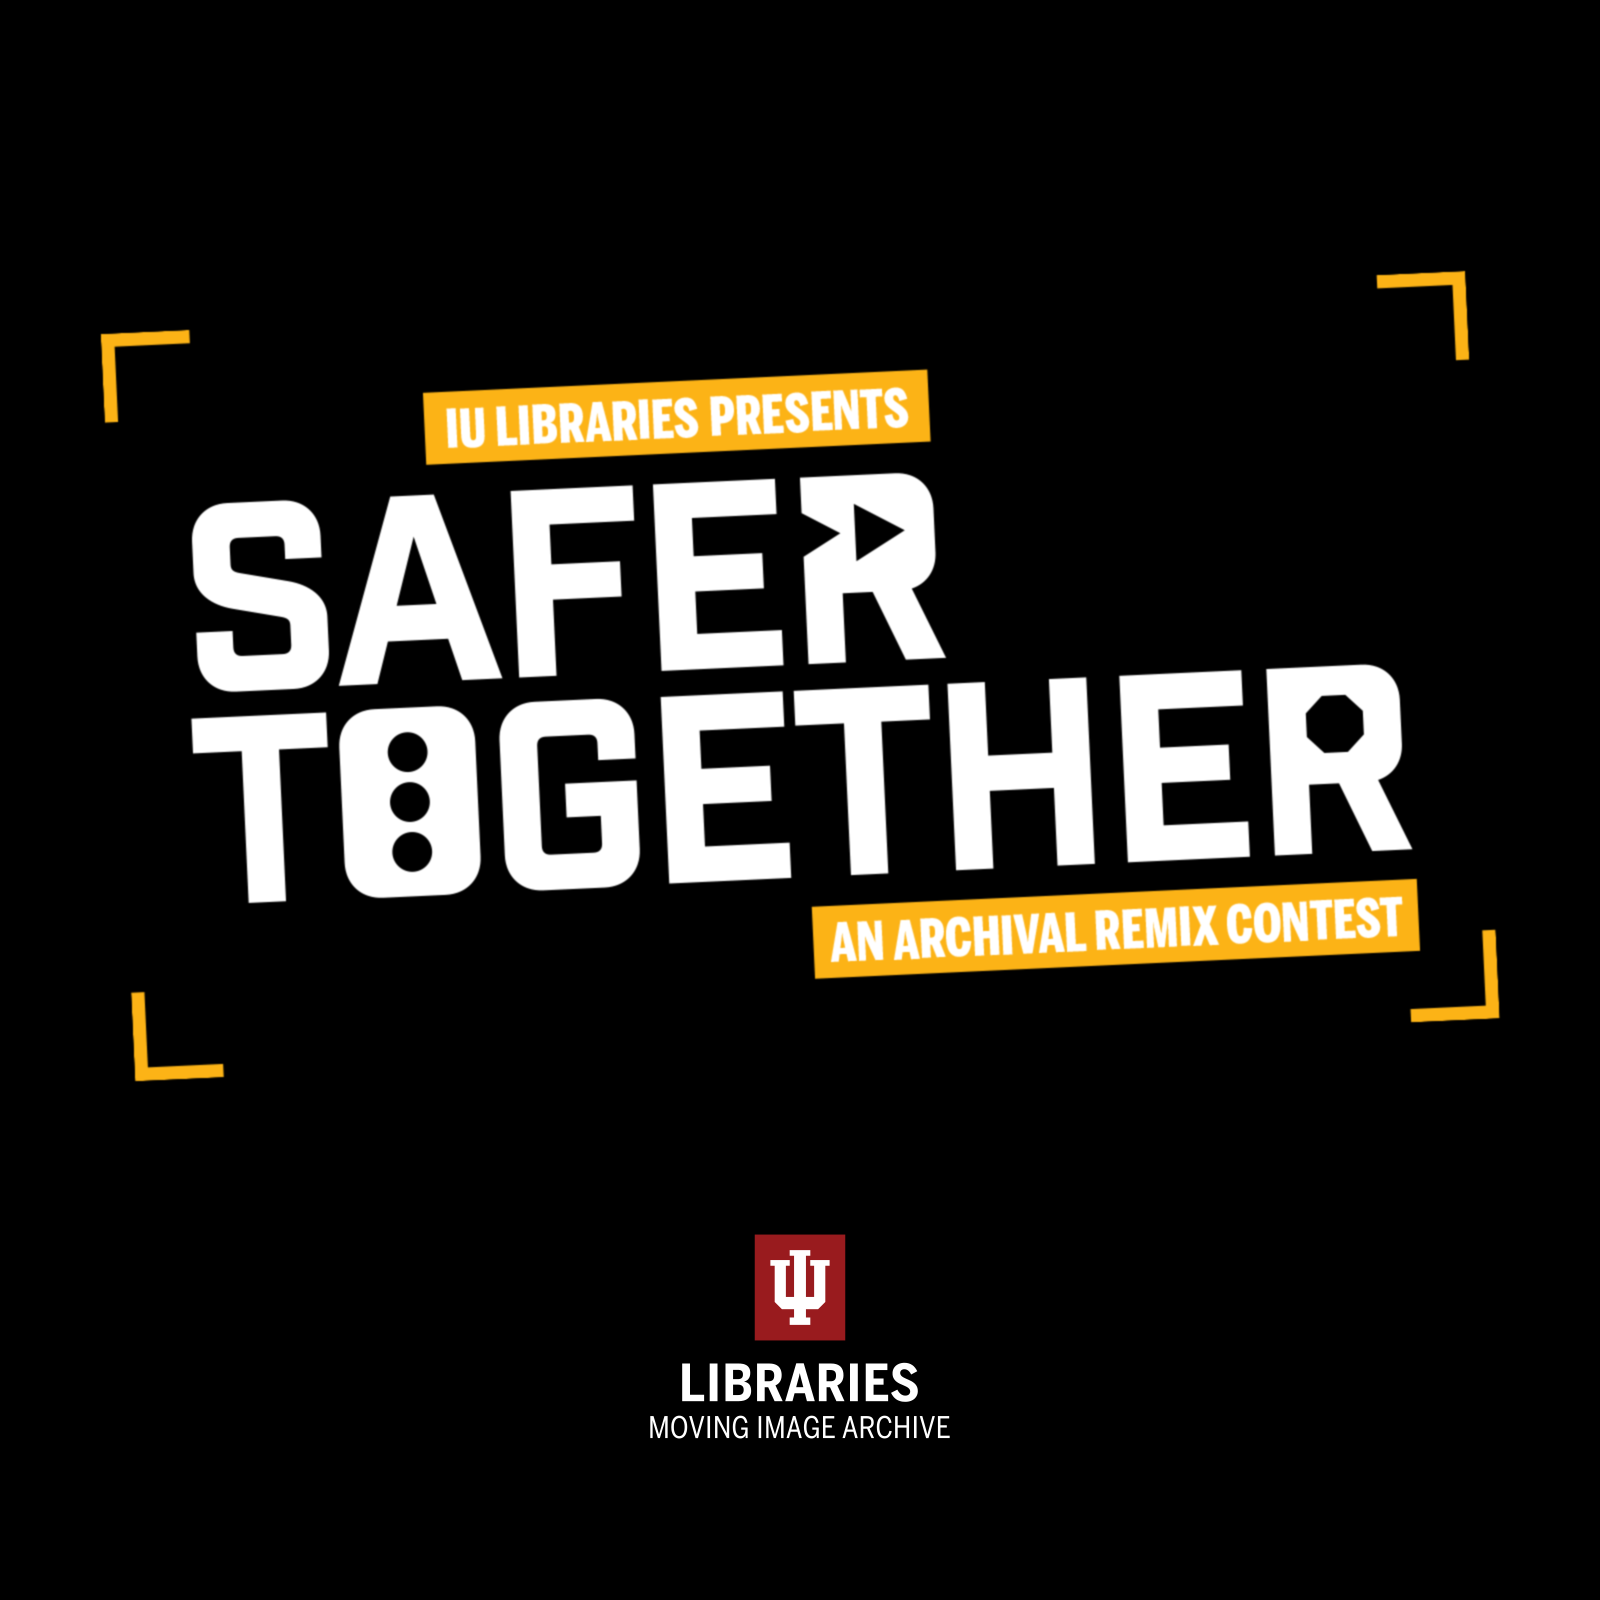 Graphic logo reading "IU Libraries Presents Safer Together: An Archival Remix Contest"